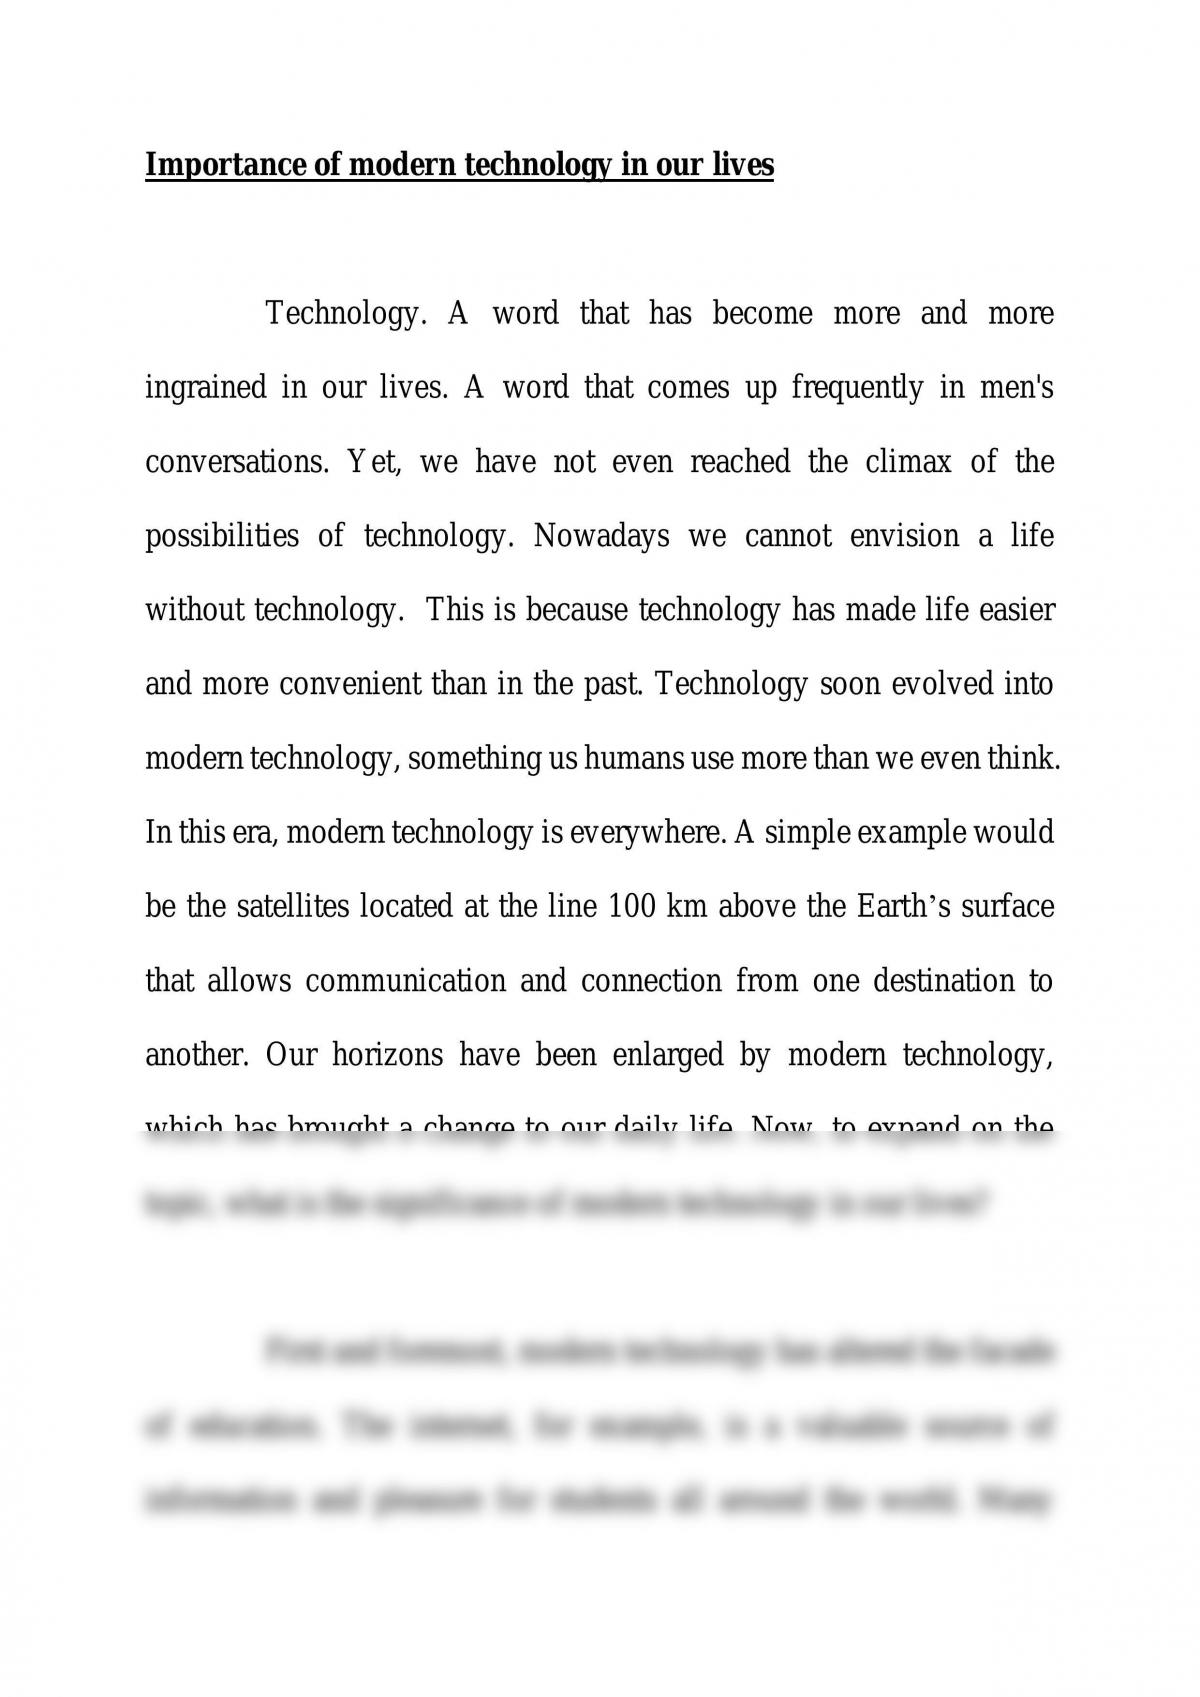 essay about modern technology is a mixed blessing